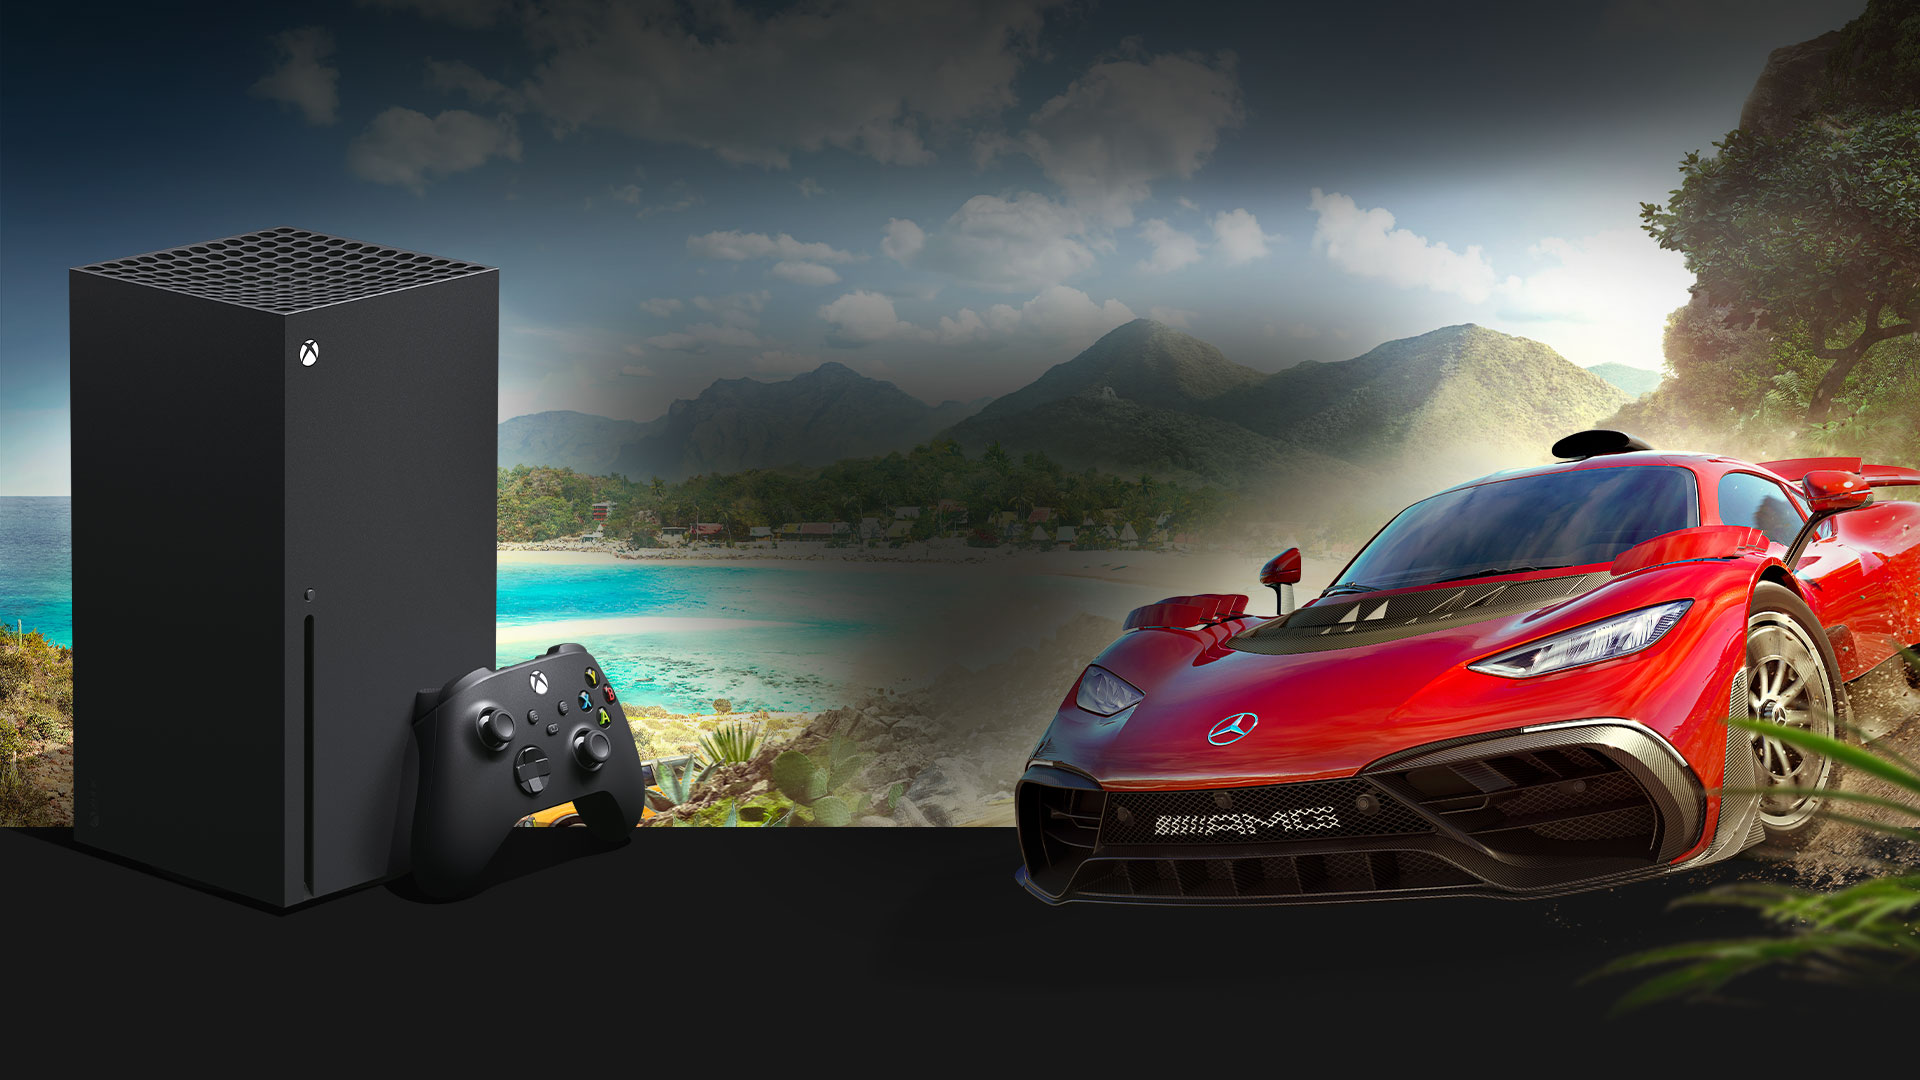 An Xbox Series X and Mercedes-AMG One sit in front of the Horizon festival in Mexico.